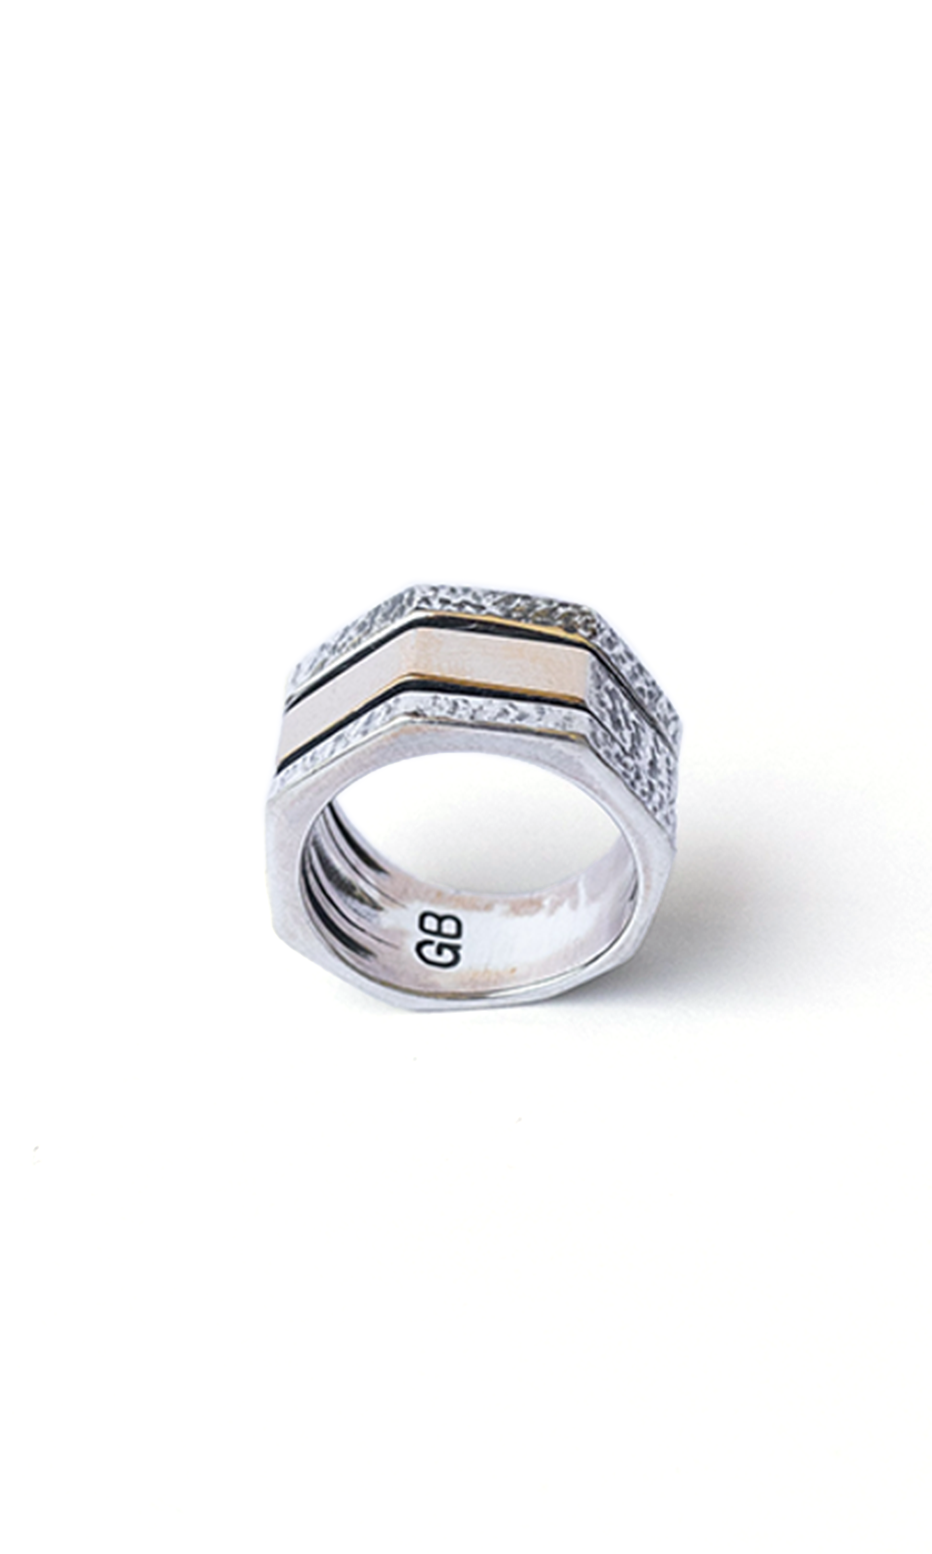 octogonal silver and gold ring